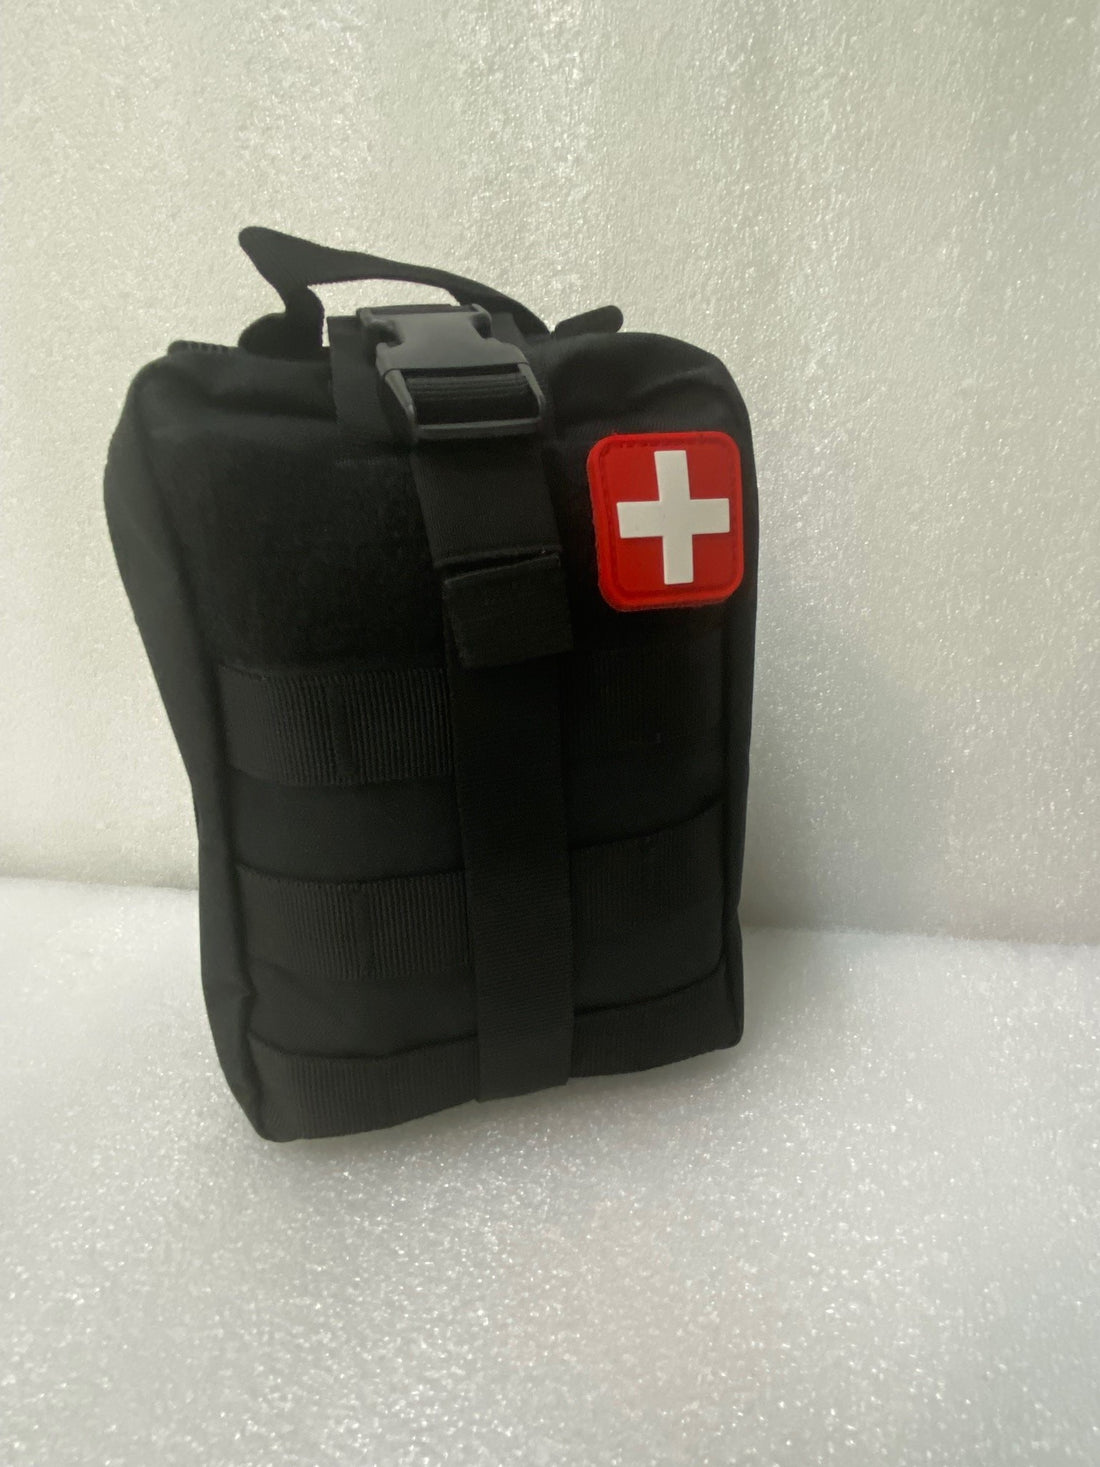 First Aid Molle Bag with suppliers